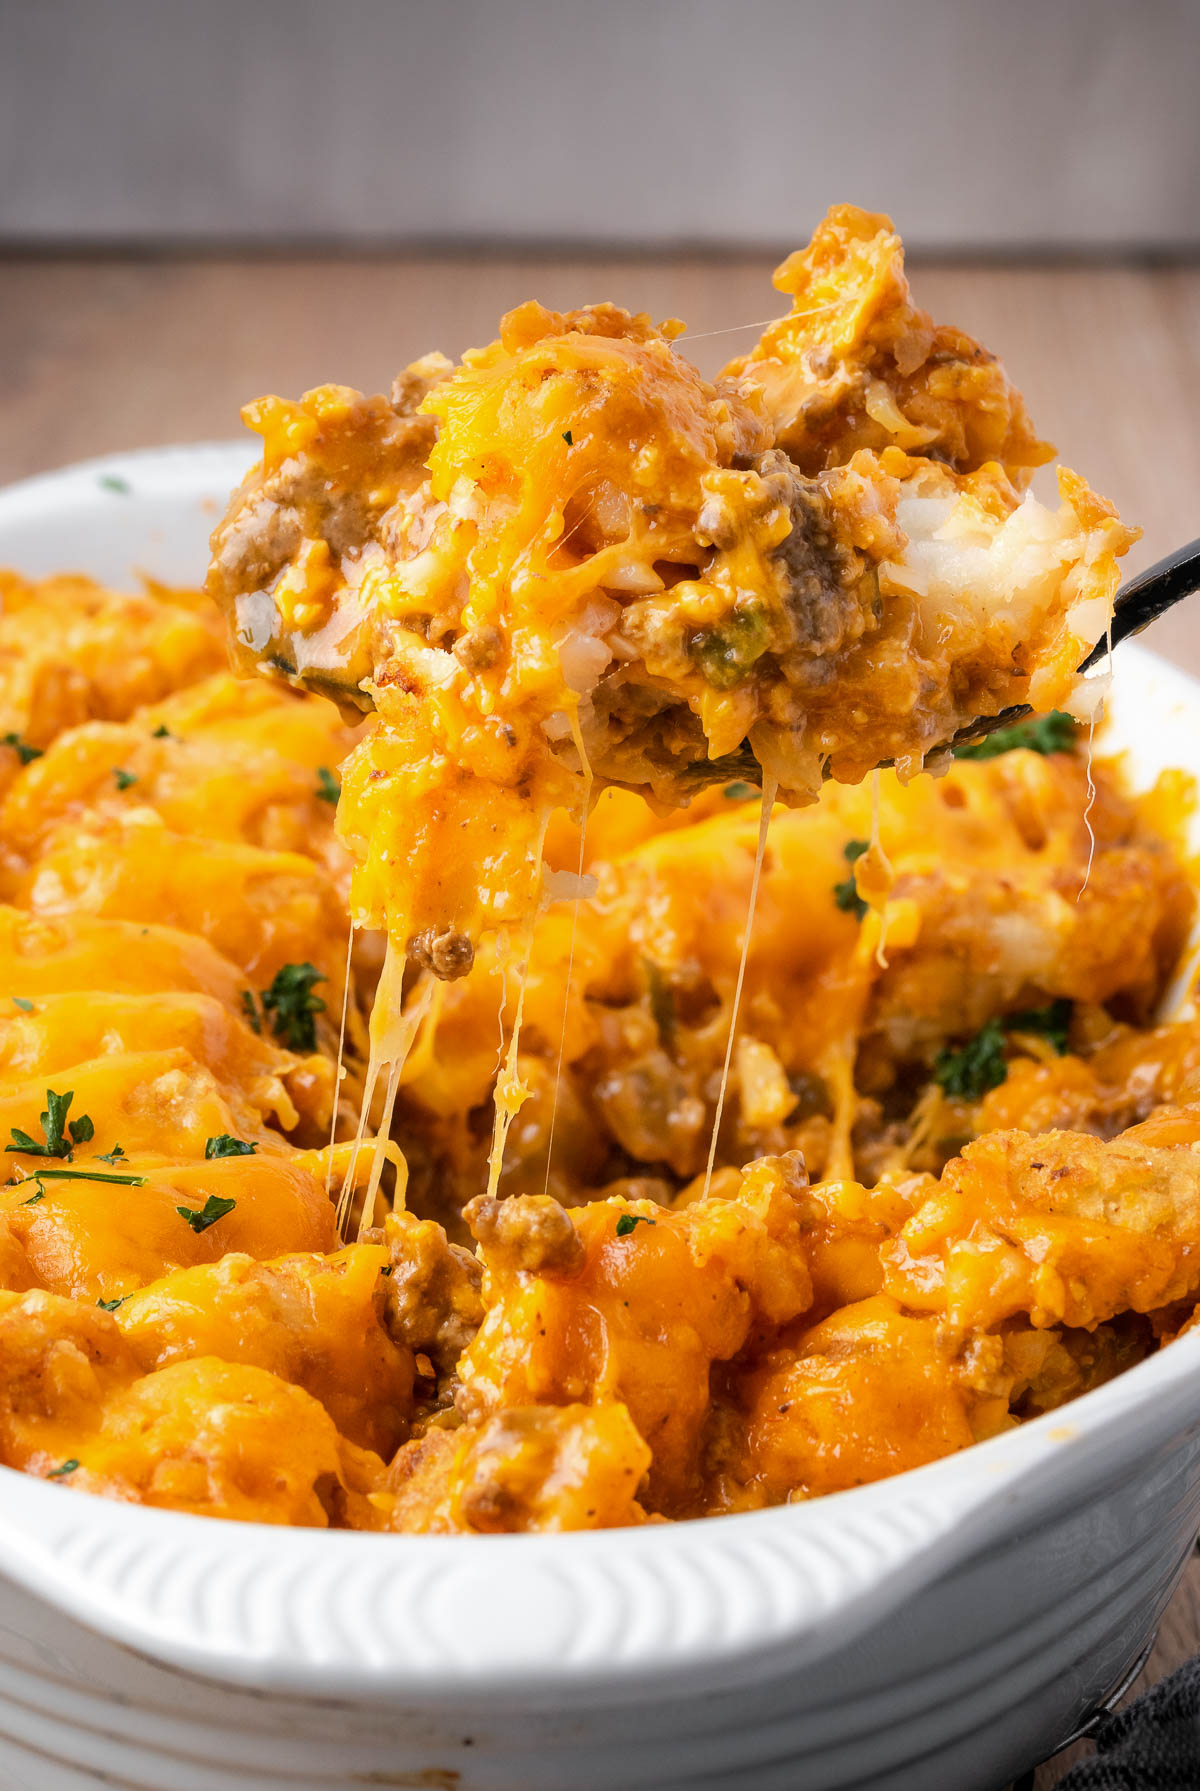 A cheesy serving of Cheeseburger Tater Tot Casserole is lifted from a casserole dish.